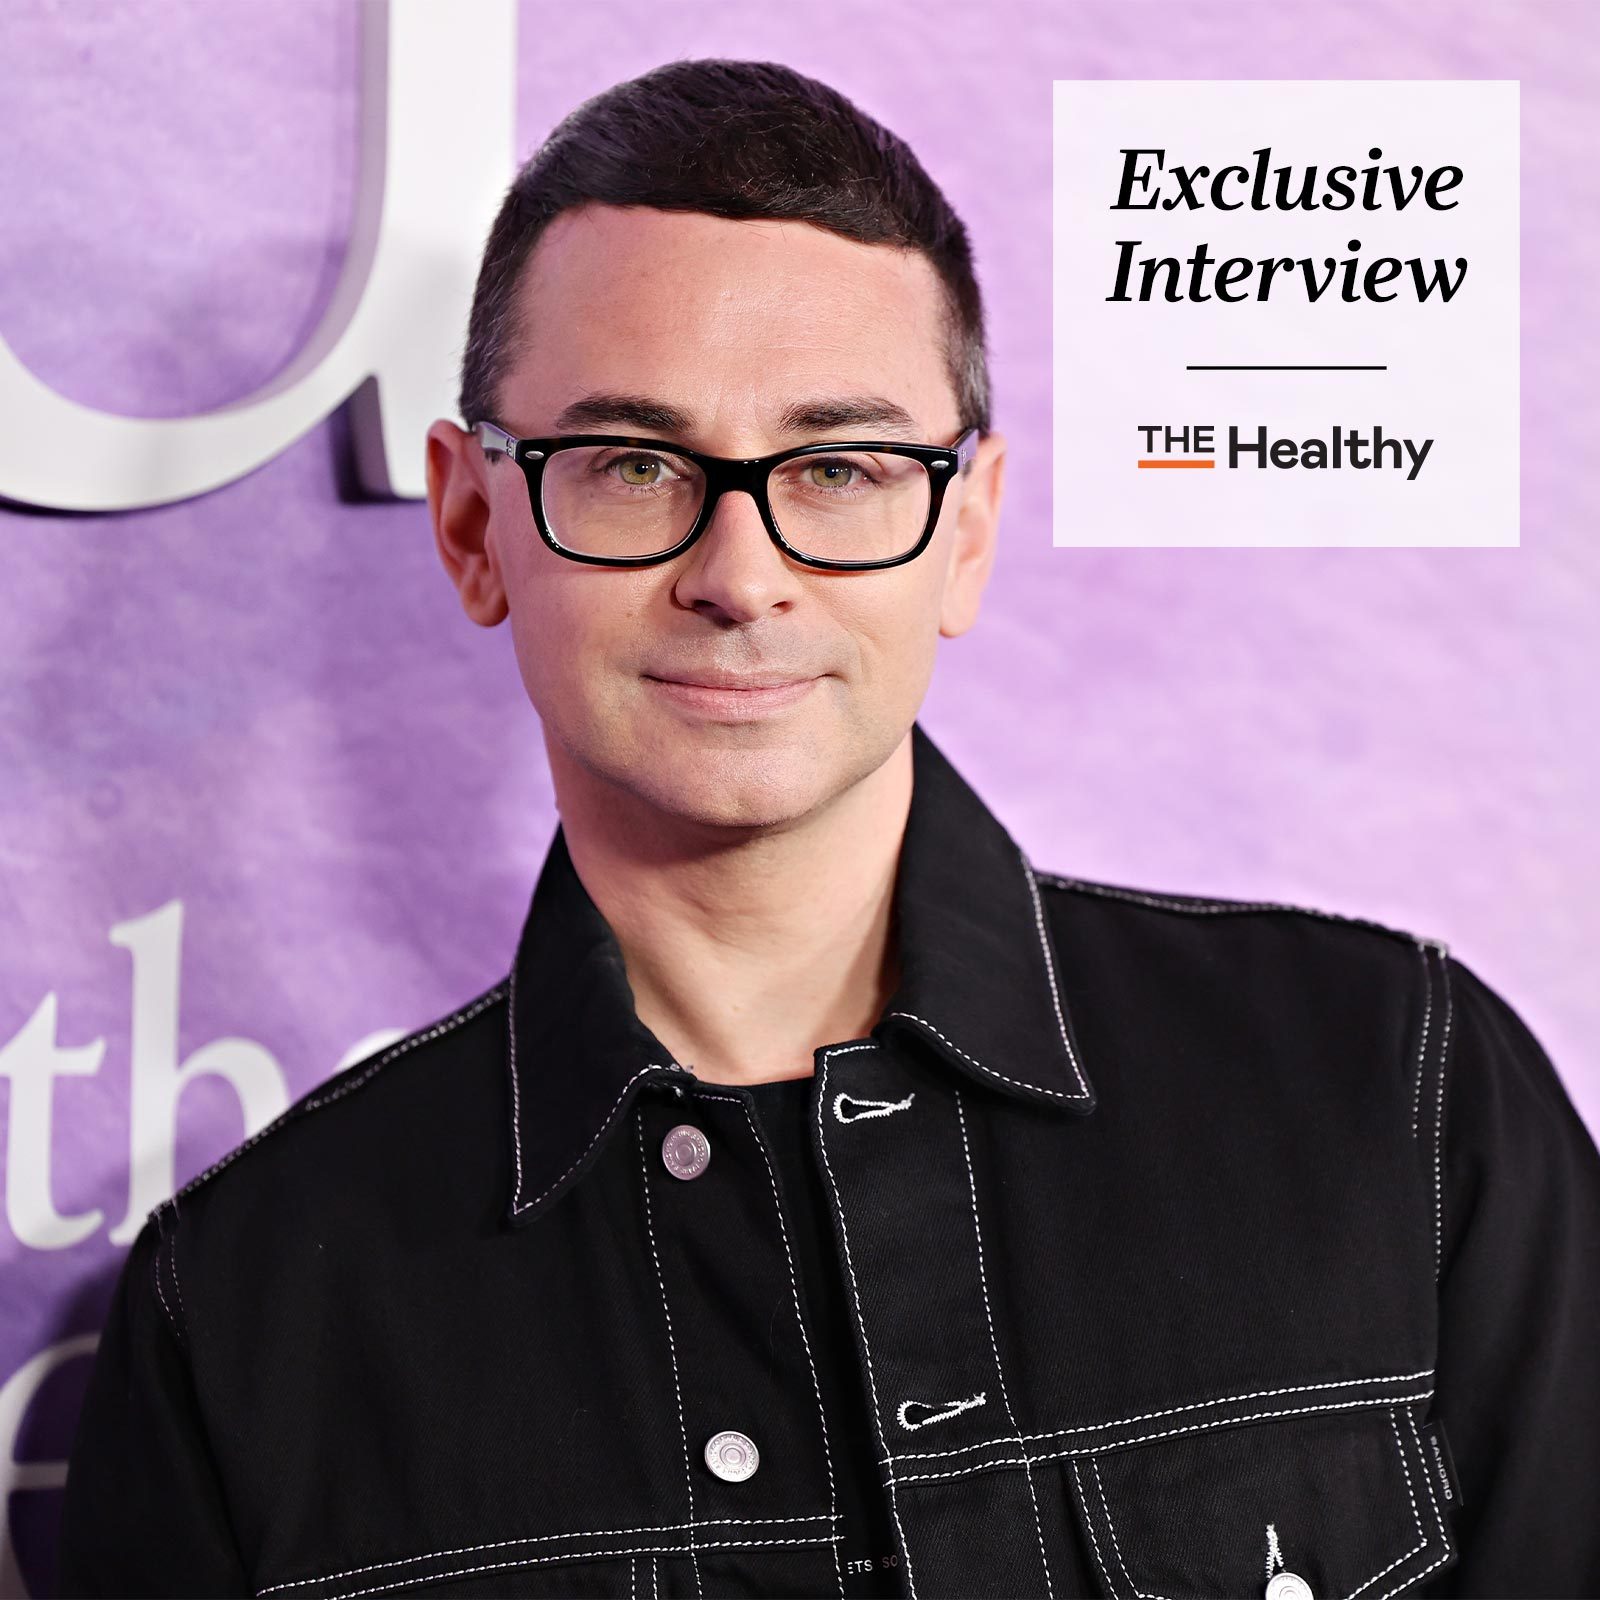 Christian Siriano with the healthy exclusive interview logo